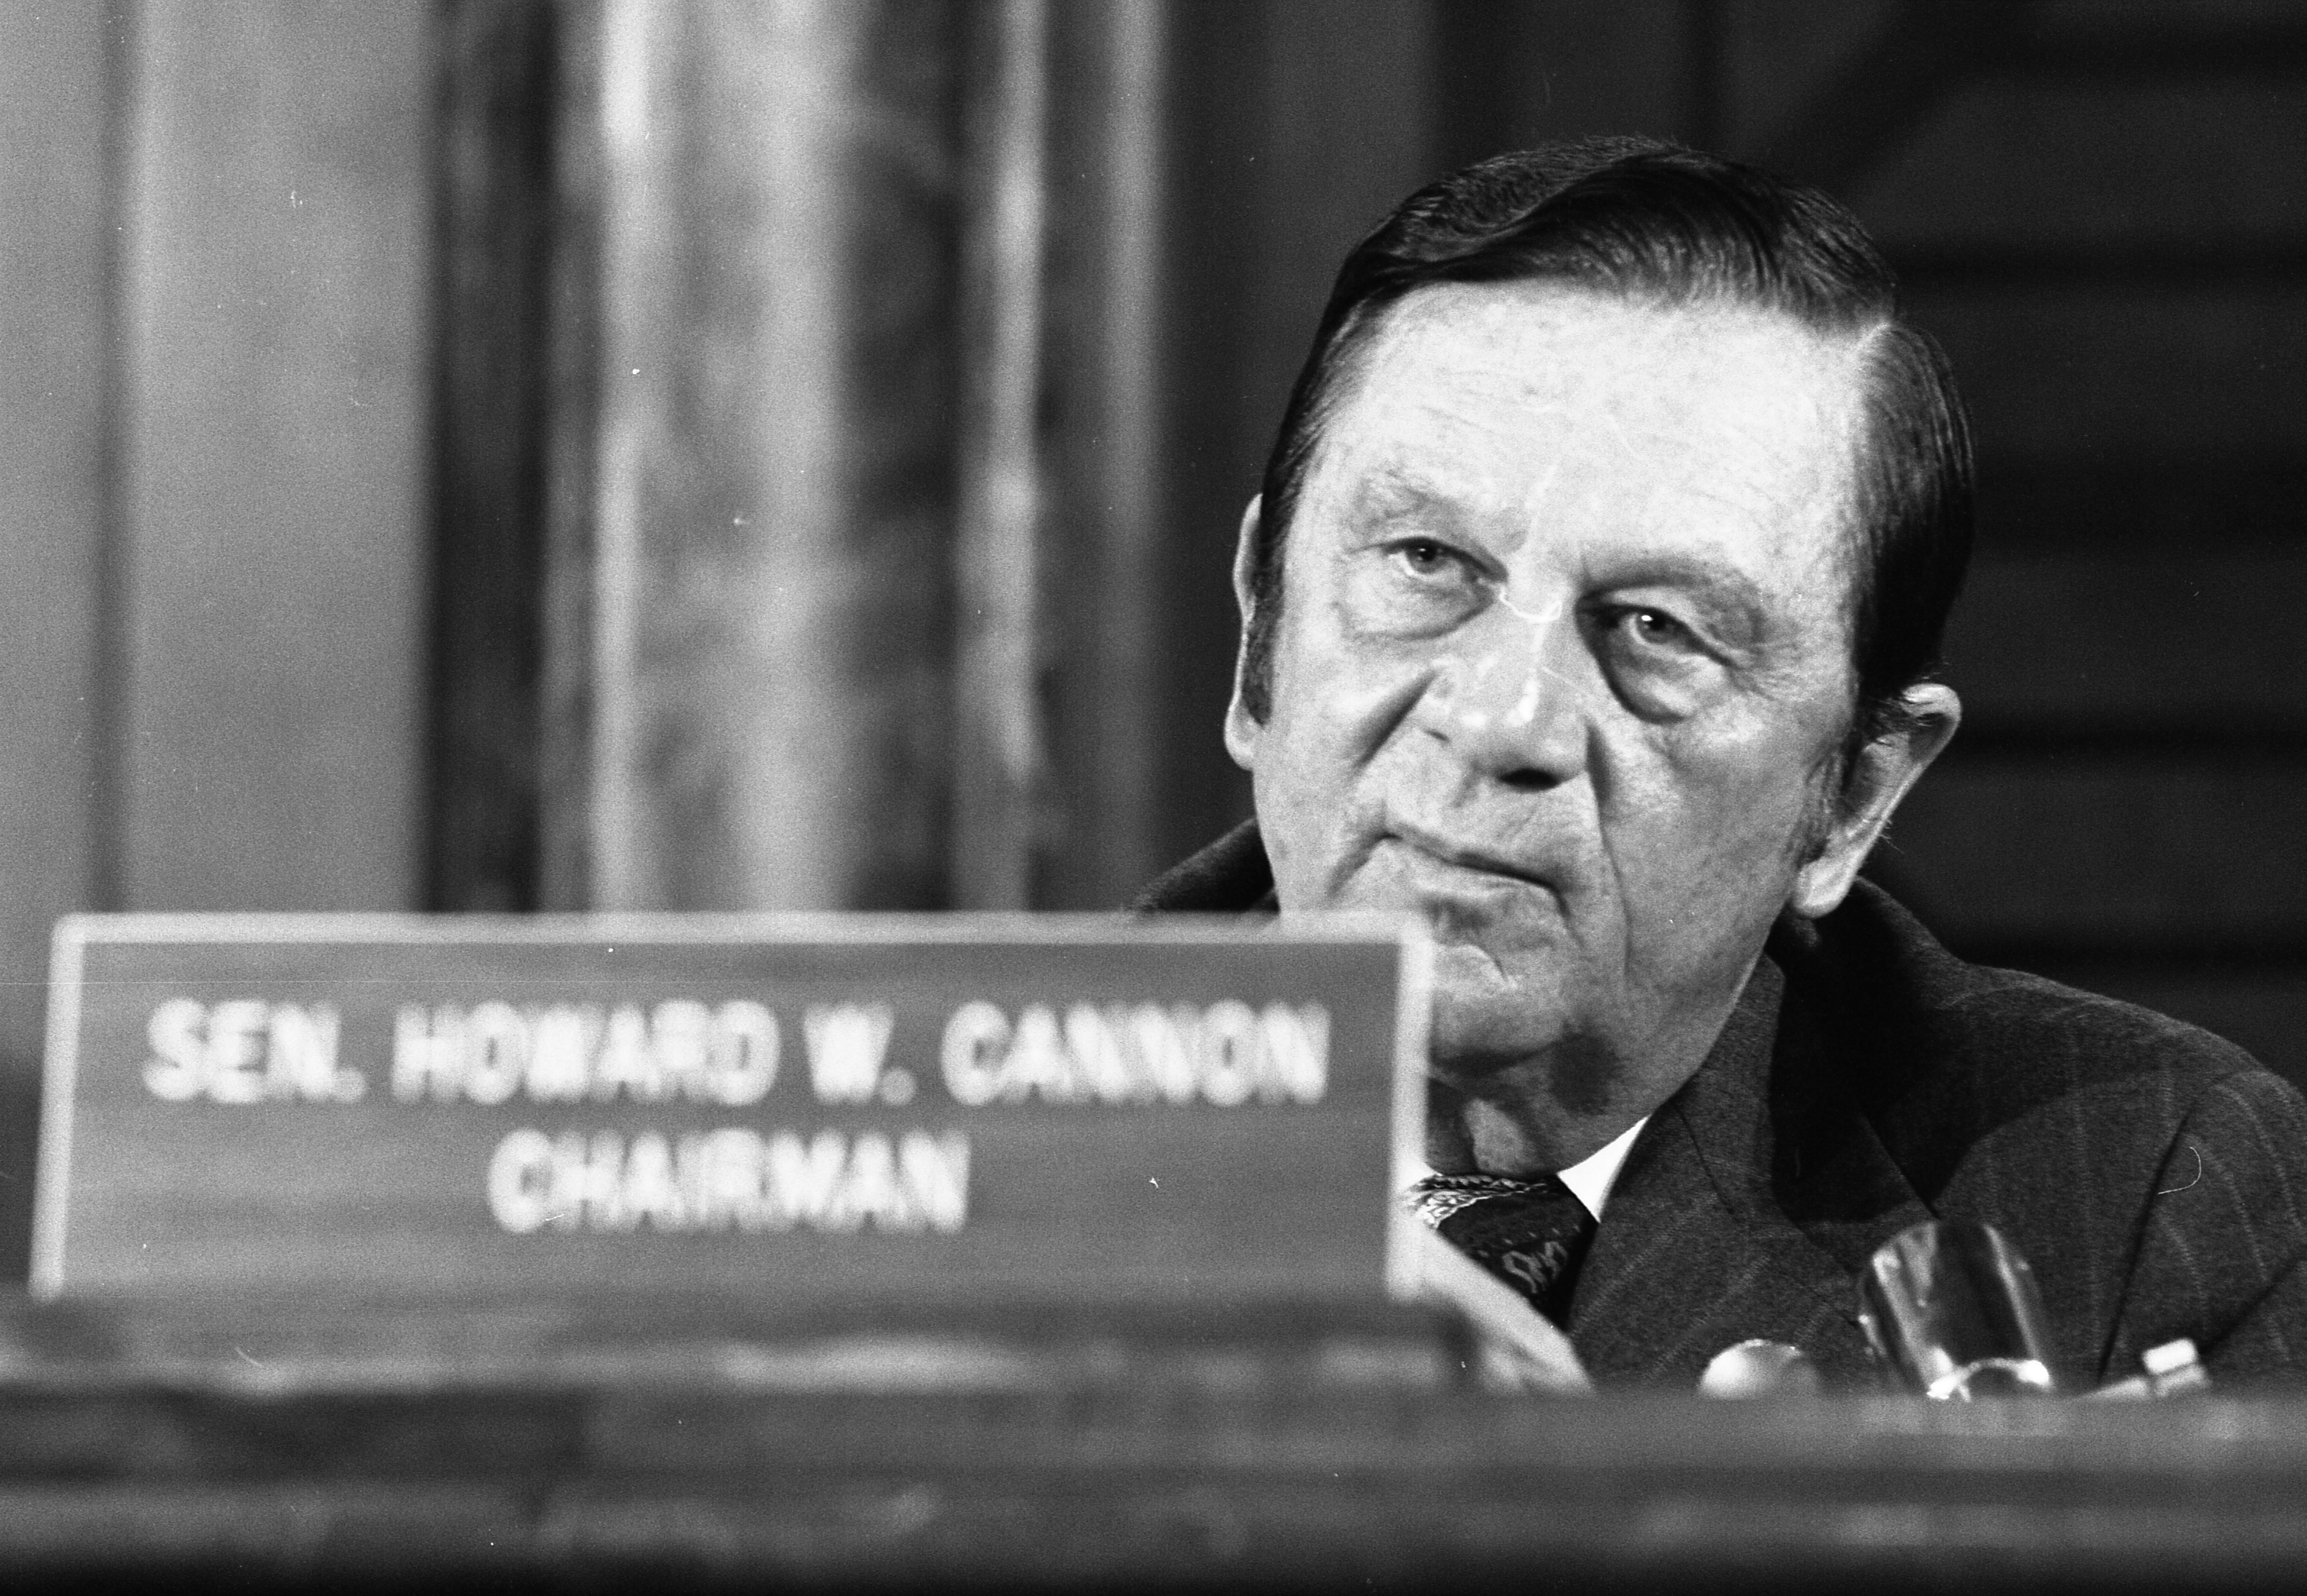 Senator Howard Cannon, Chairman of the Senate Rules Comittee at Gerald R. Ford's Vice Presidential confirmation, 11/1973.